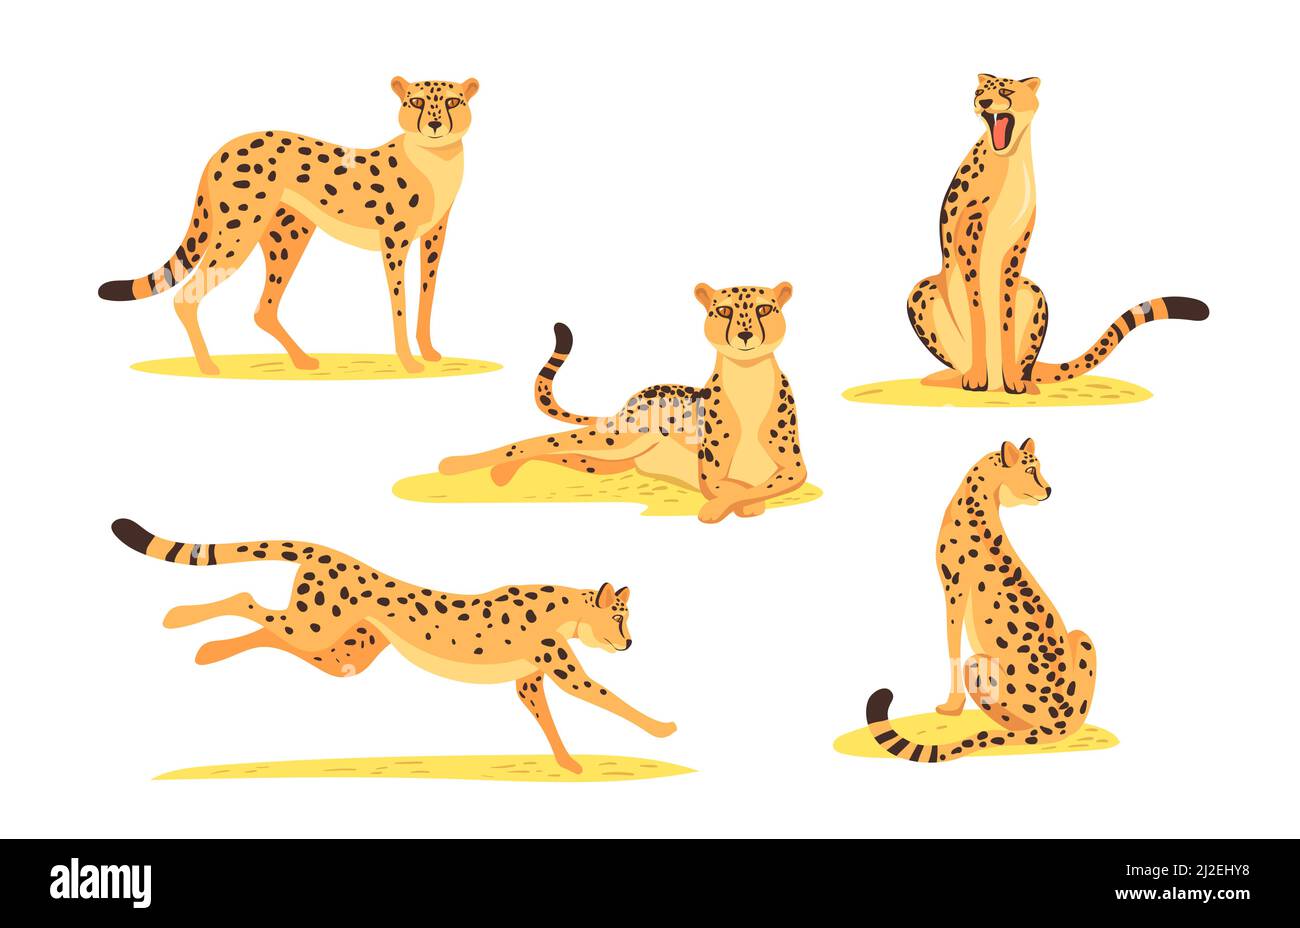 Cartoon leopard set. Wild jaguar, cheetah cat standing, lying, sitting, running, jumping isolated on white. Vector illustration for jungle animal, wil Stock Vector